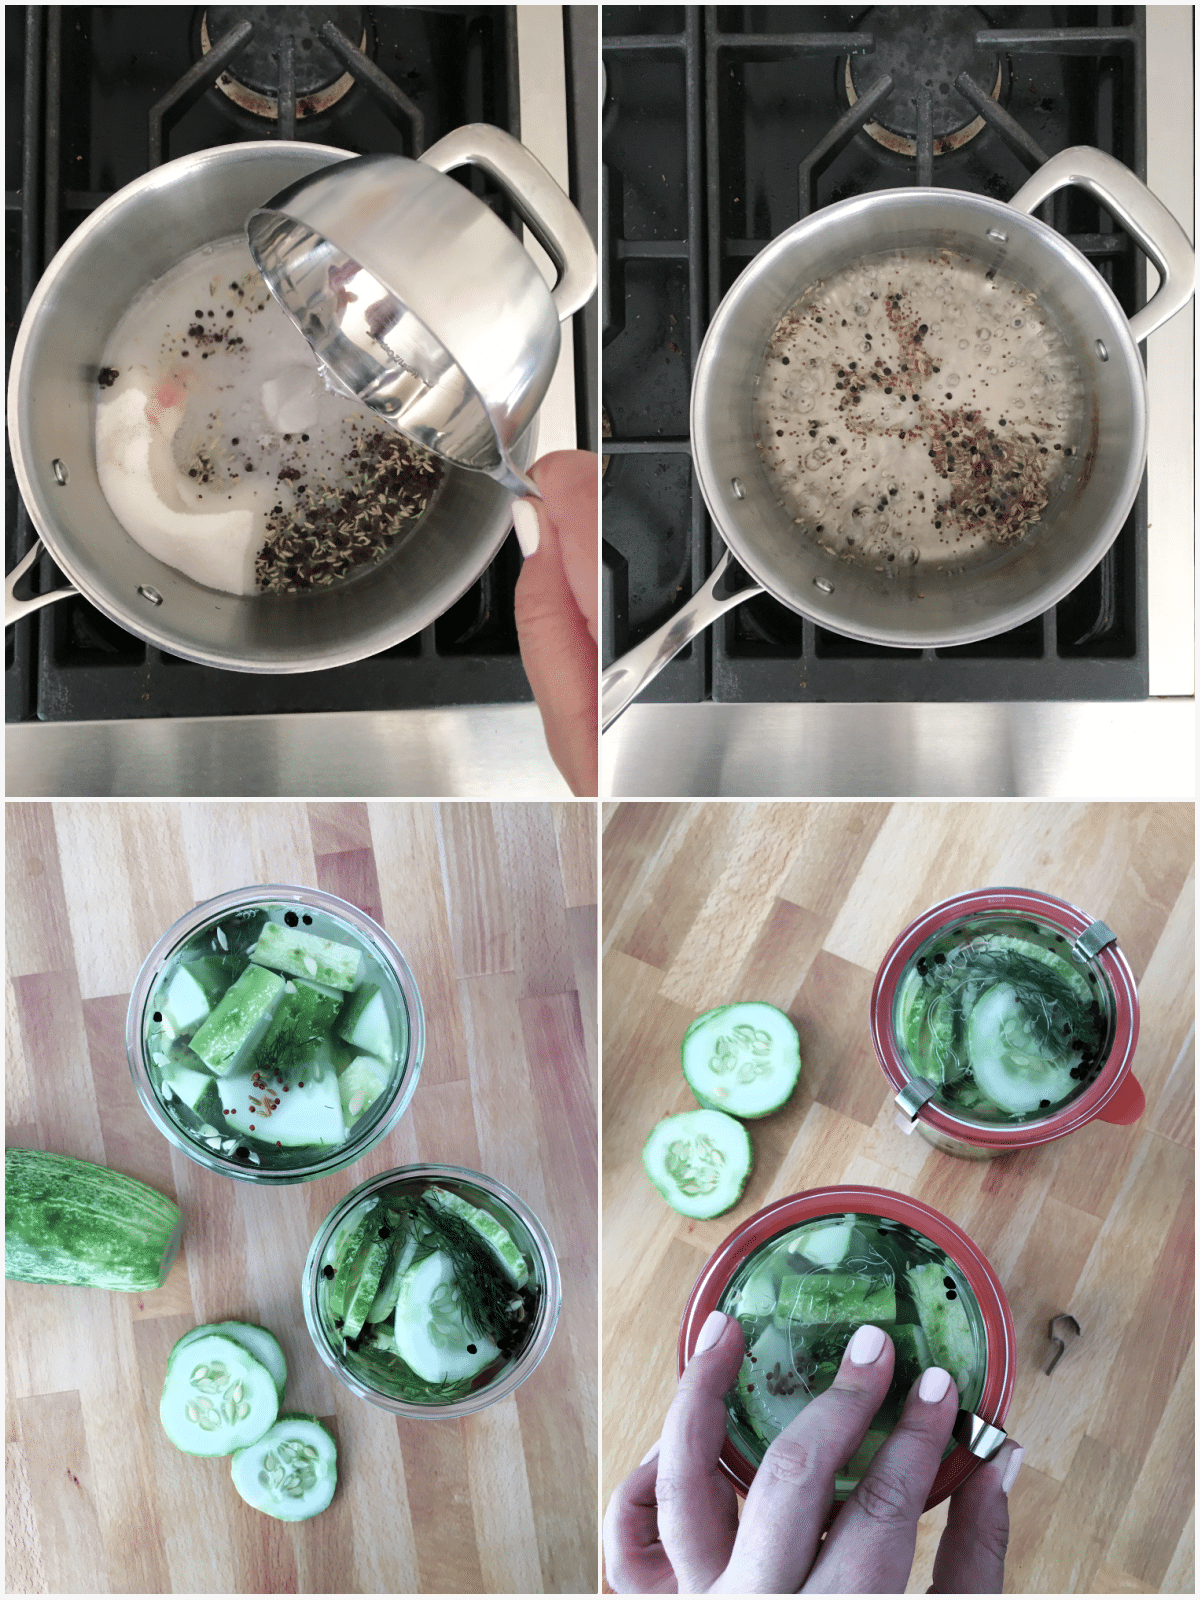 A four image collage showing how to make quick pickles: boiling vinegar and spices, adding cucumbers, peppers and peppercorns to glass jars, pouring in the brine, and adding lids to jars.